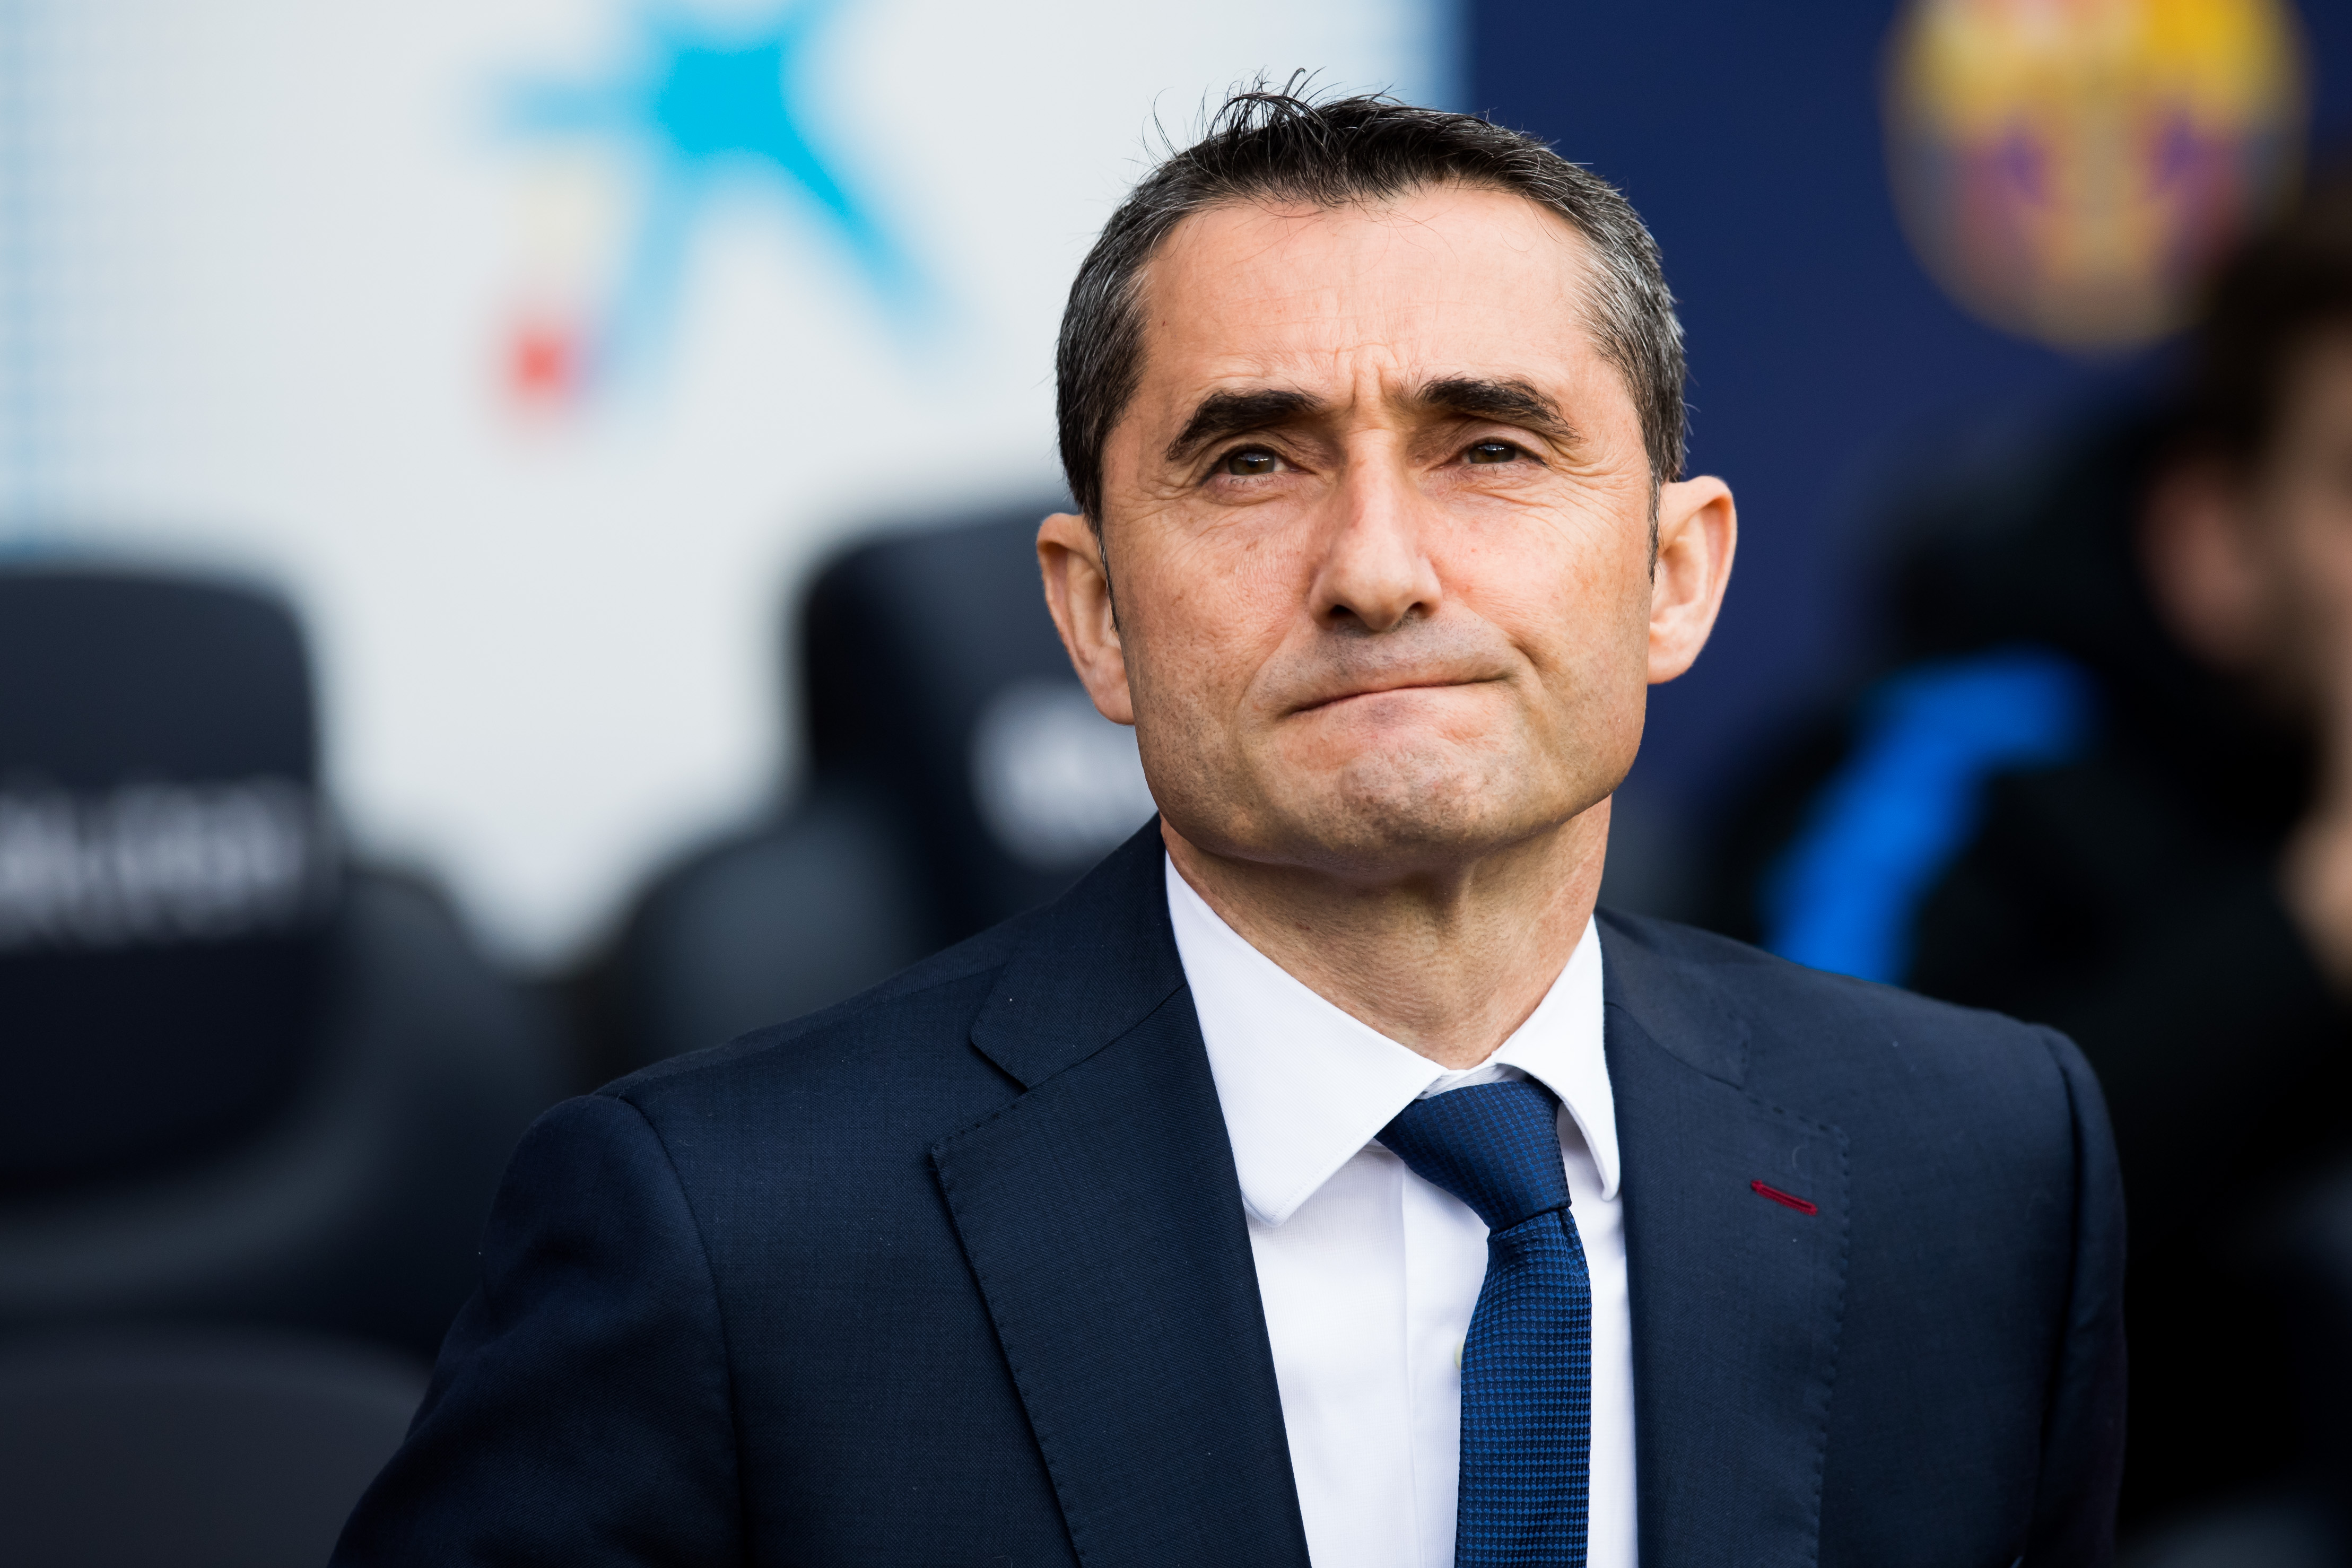 BARCELONA, SPAIN - FEBRUARY 11: Head coach Ernesto Valverde of FC Barcelona looks on before the La Liga match between Barcelona and Getafe at Camp Nou on February 11, 2018 in Barcelona, Spain. (Photo by Alex Caparros/Getty Images)